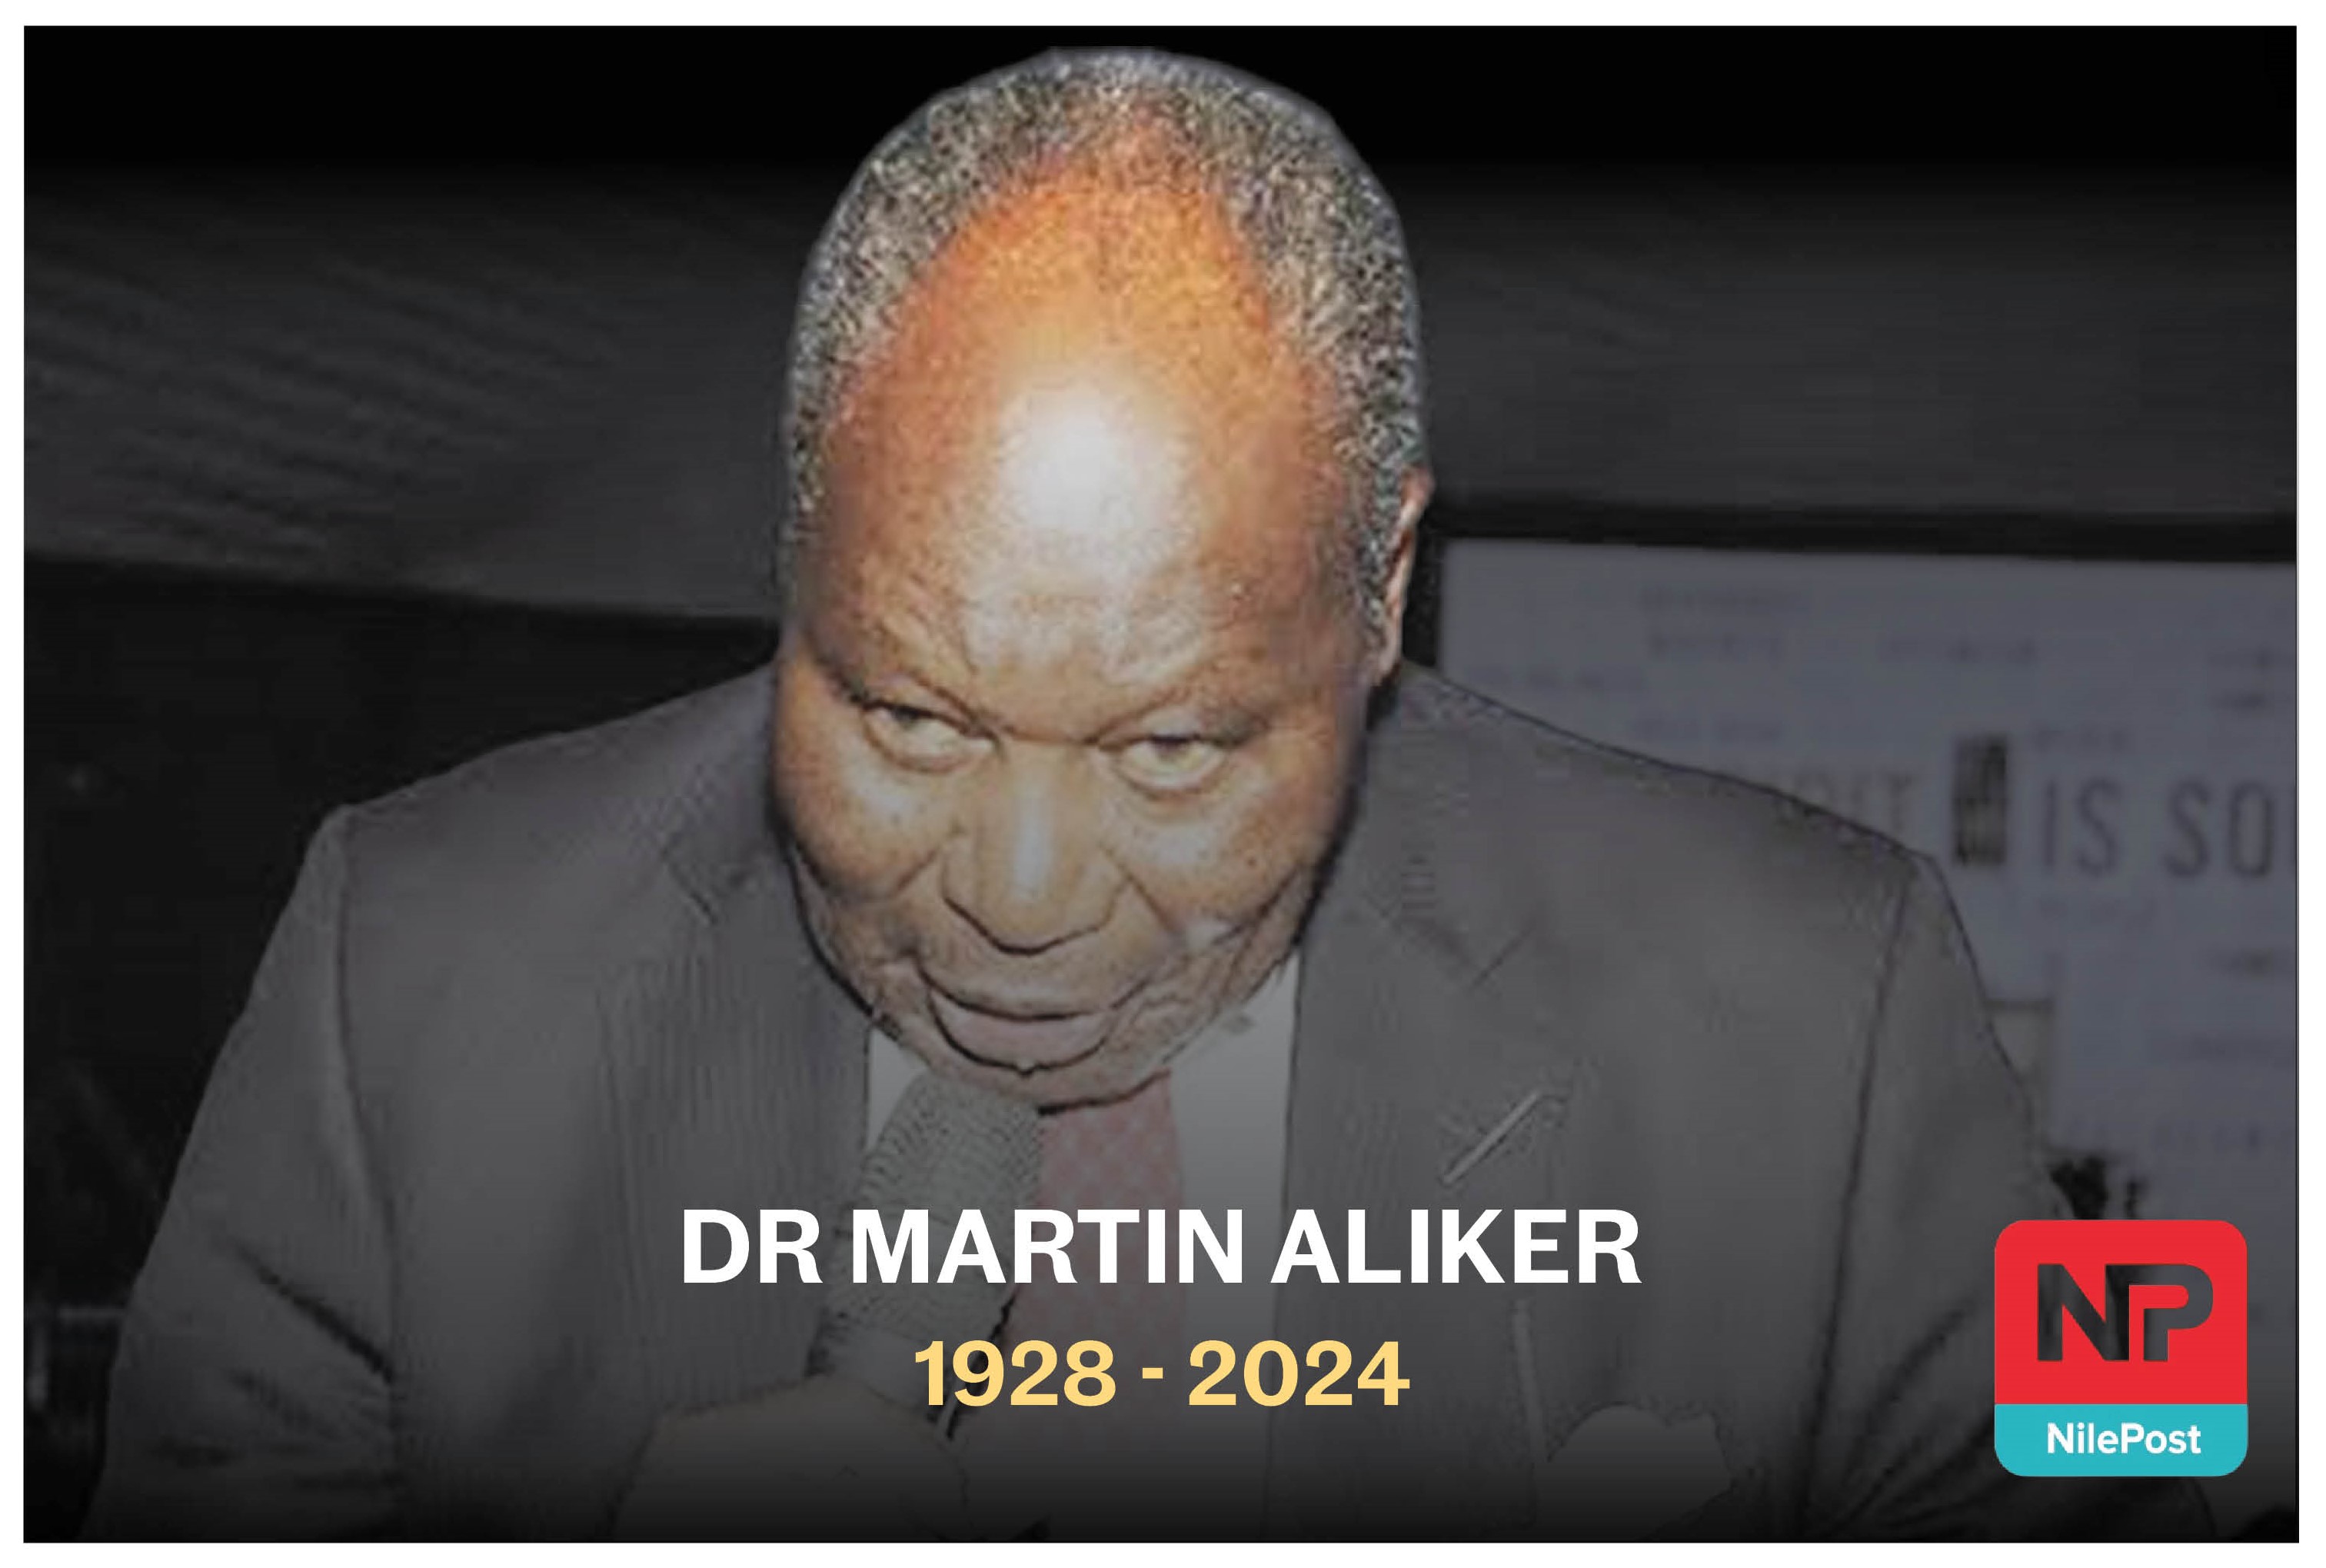 Victoria University pays tribute to former chancellor, Dr.Martin Aliker.